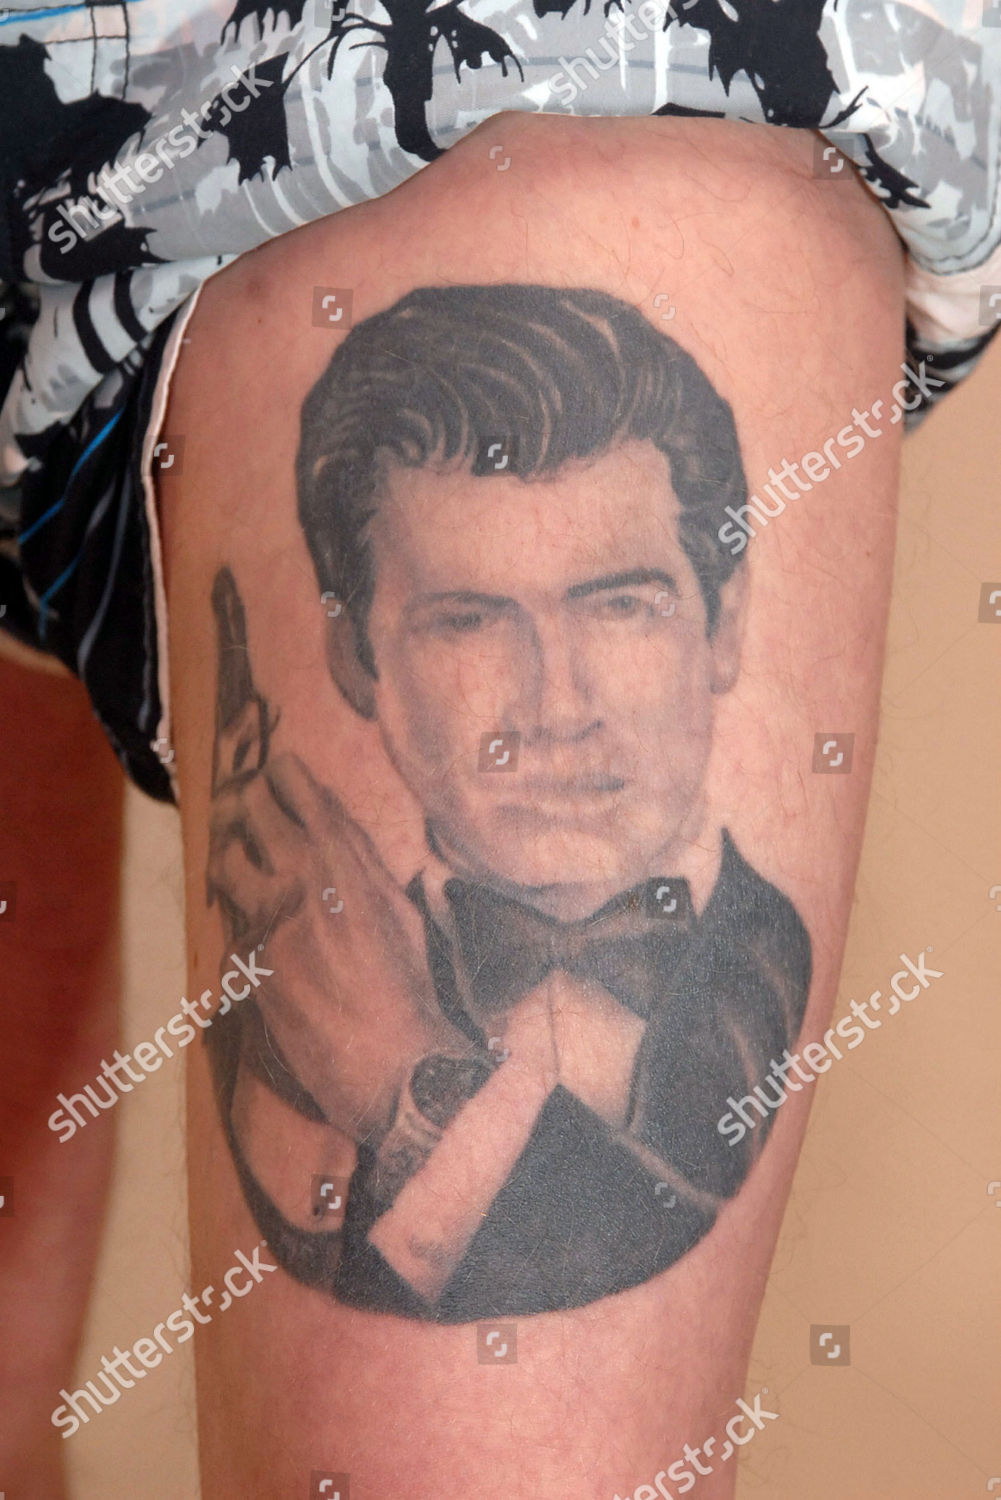 Sean Connery  Help Me Tattoo Training Forum  Tattooing 101